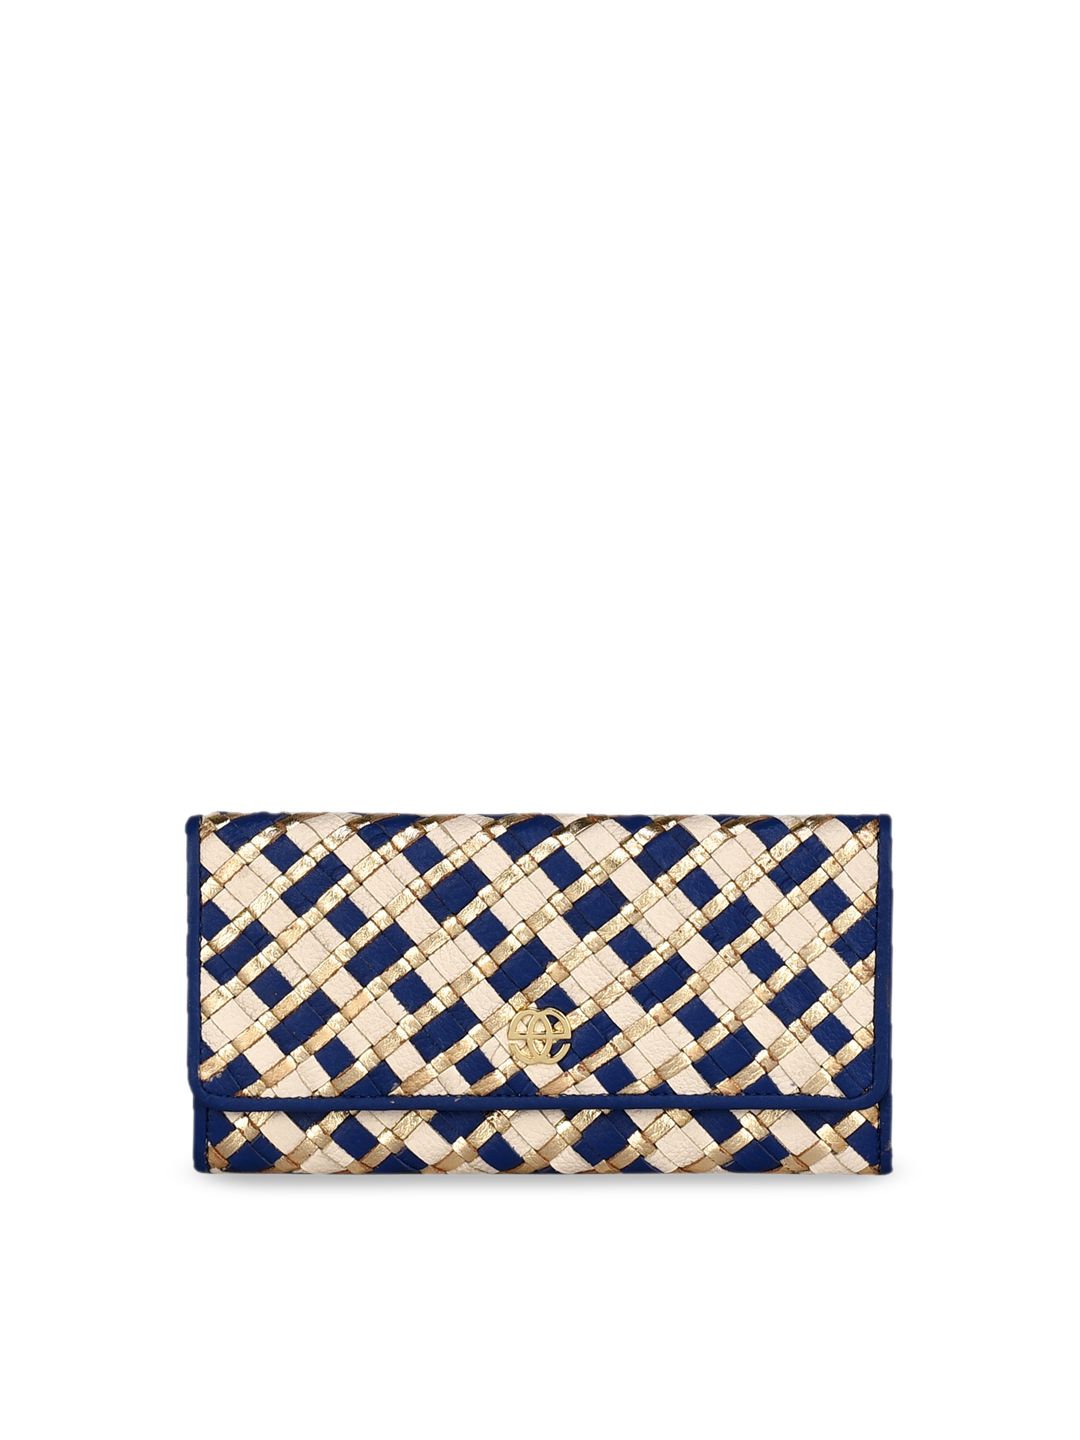 Eske Women Blue & Gold-Toned Textured Three Fold Wallet Price in India